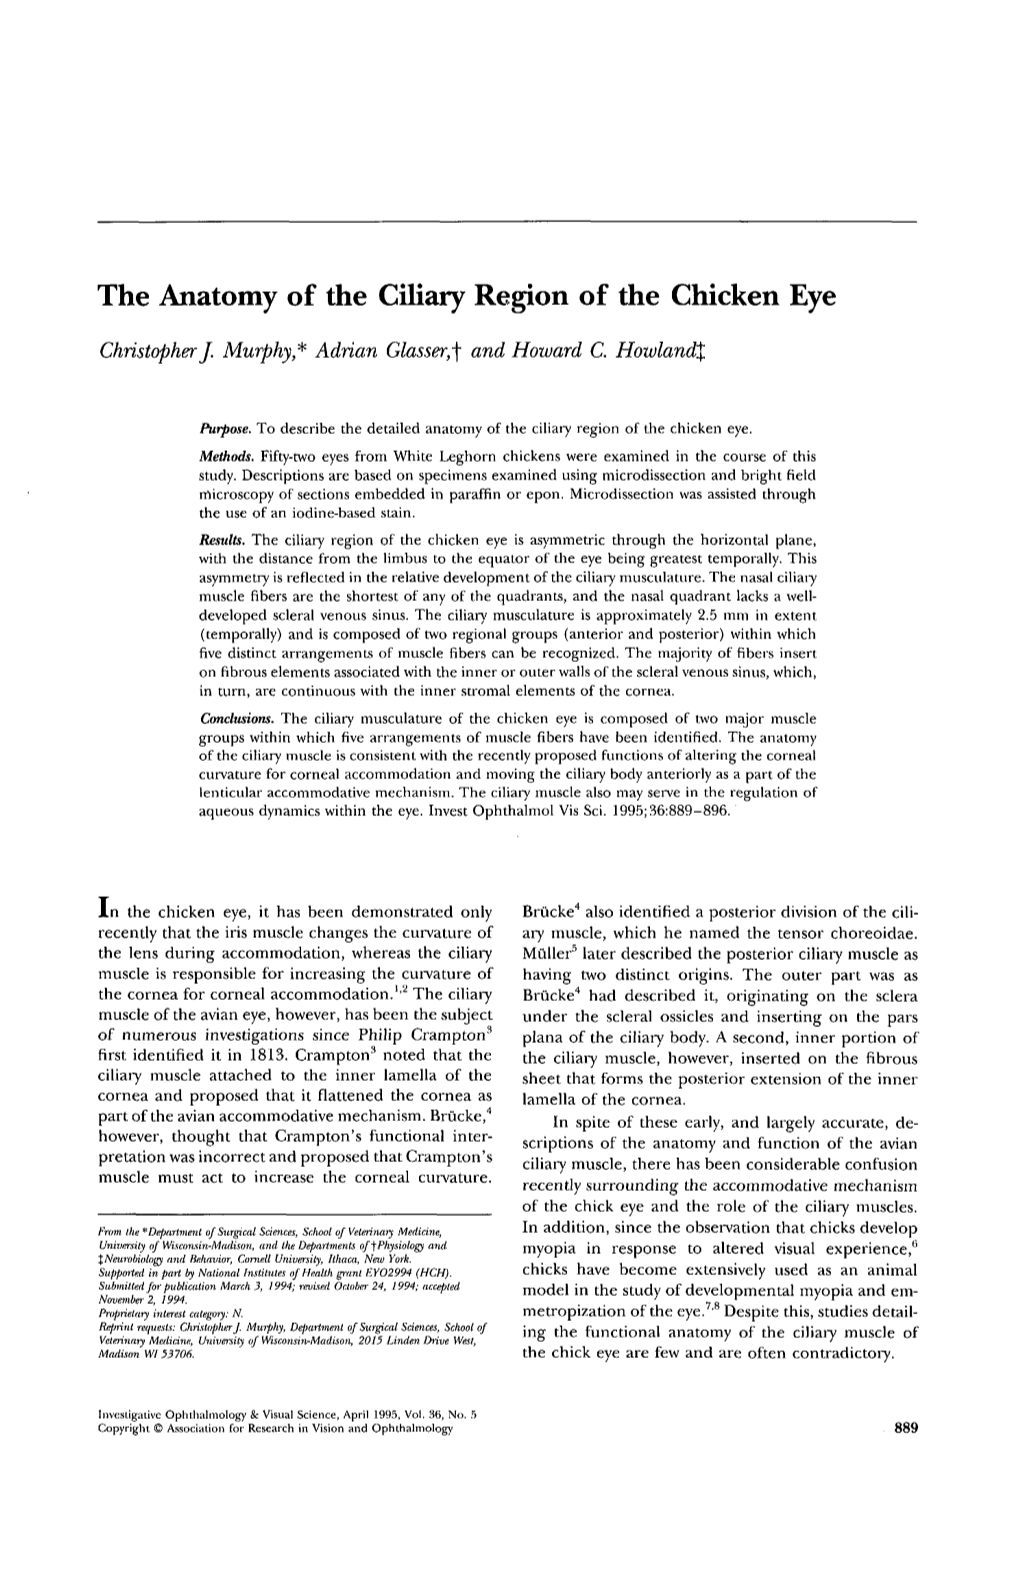 (1995) the Anatomy of the Ciliary Region Of